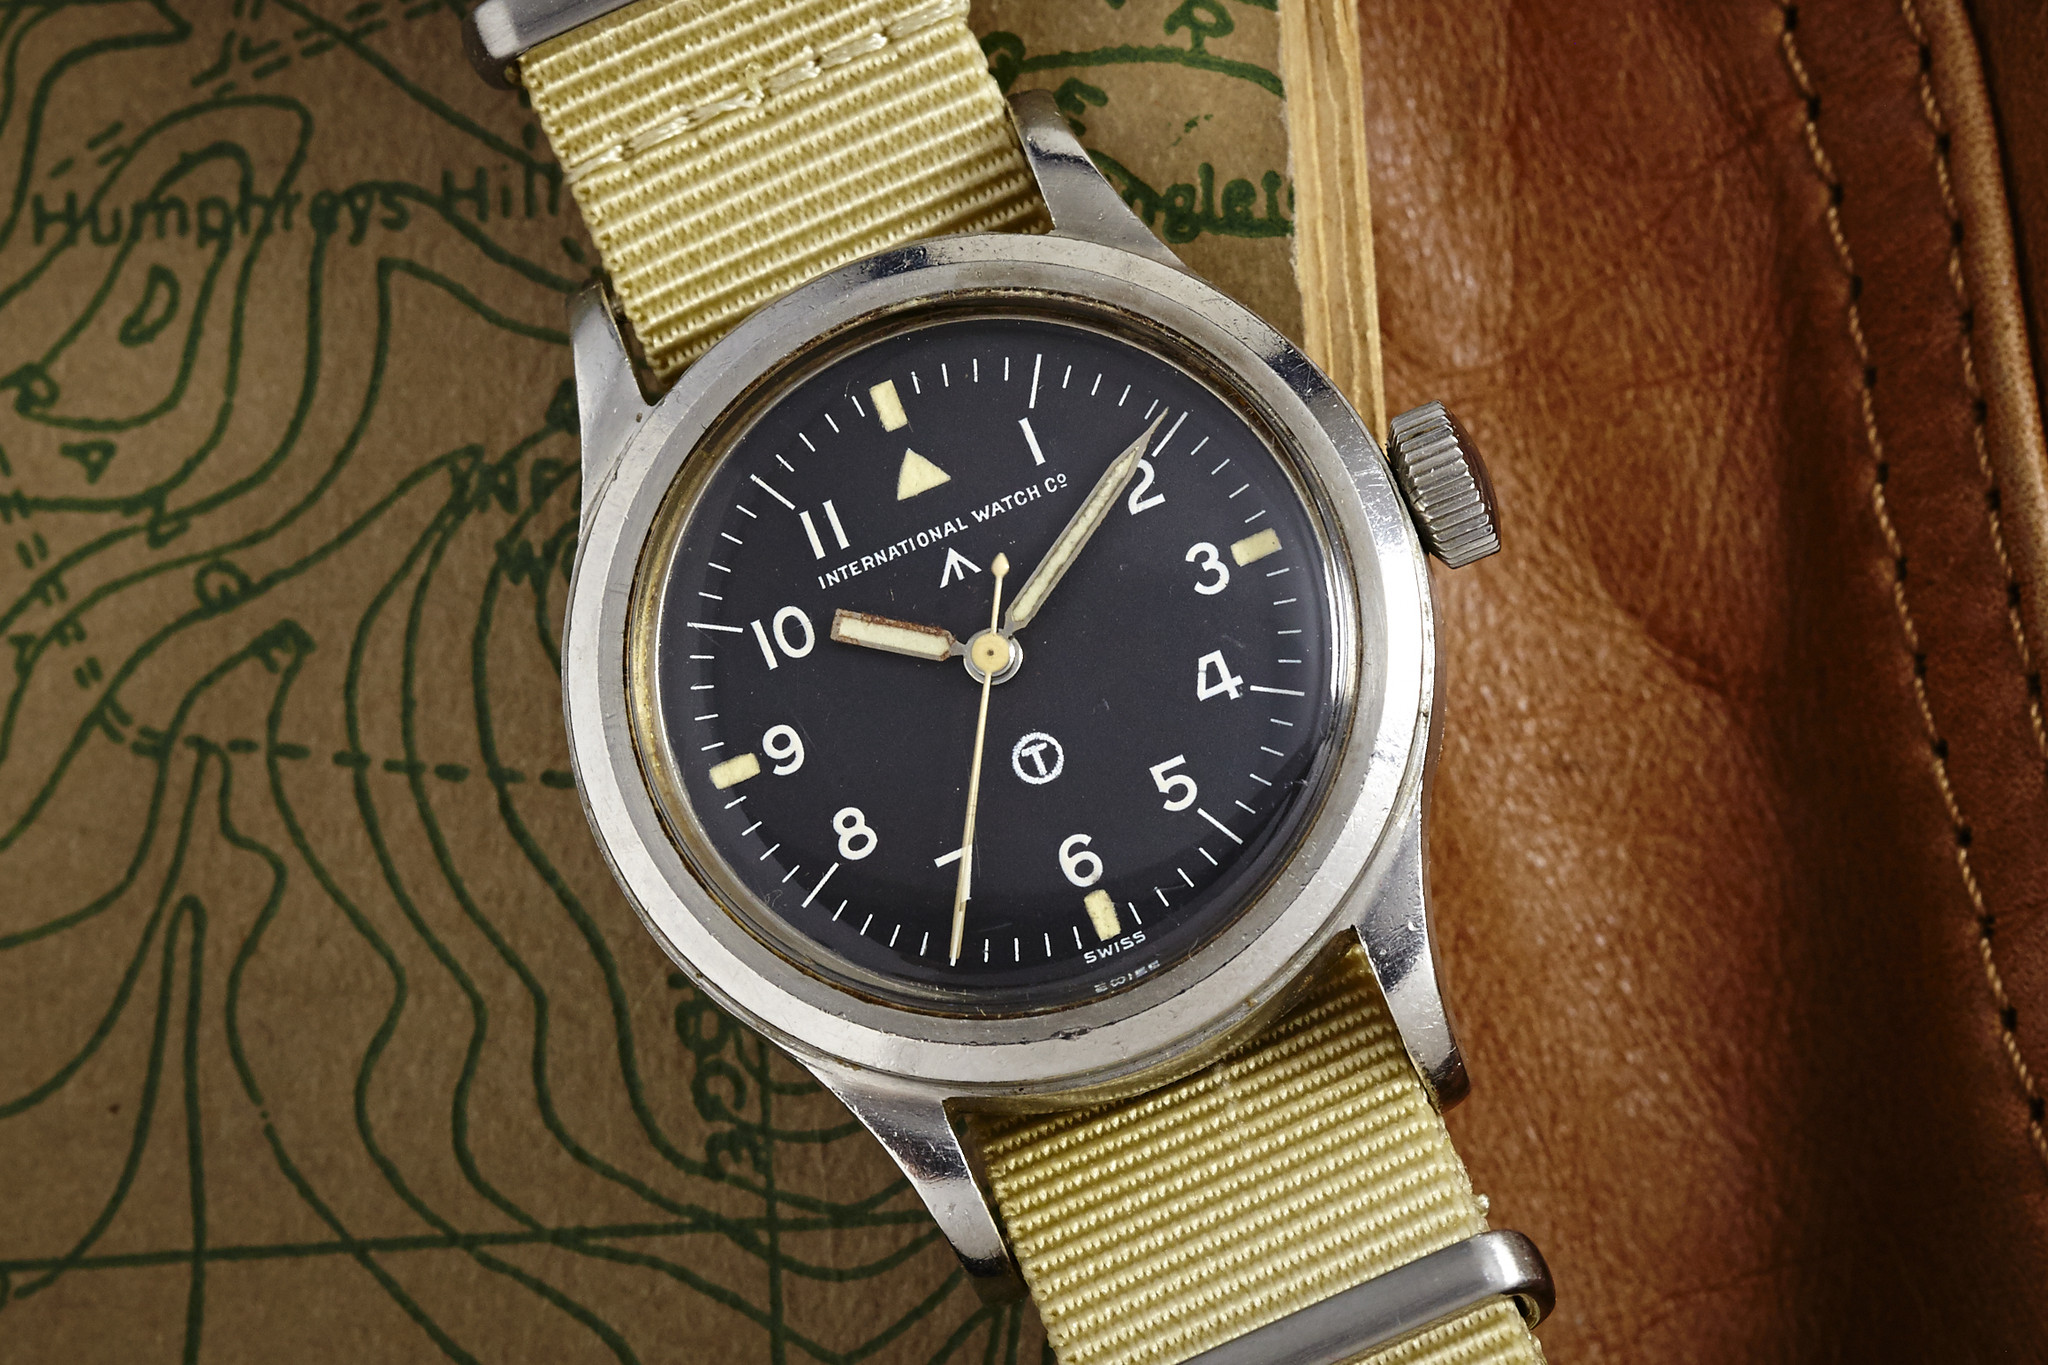 iwc mk11 for sale